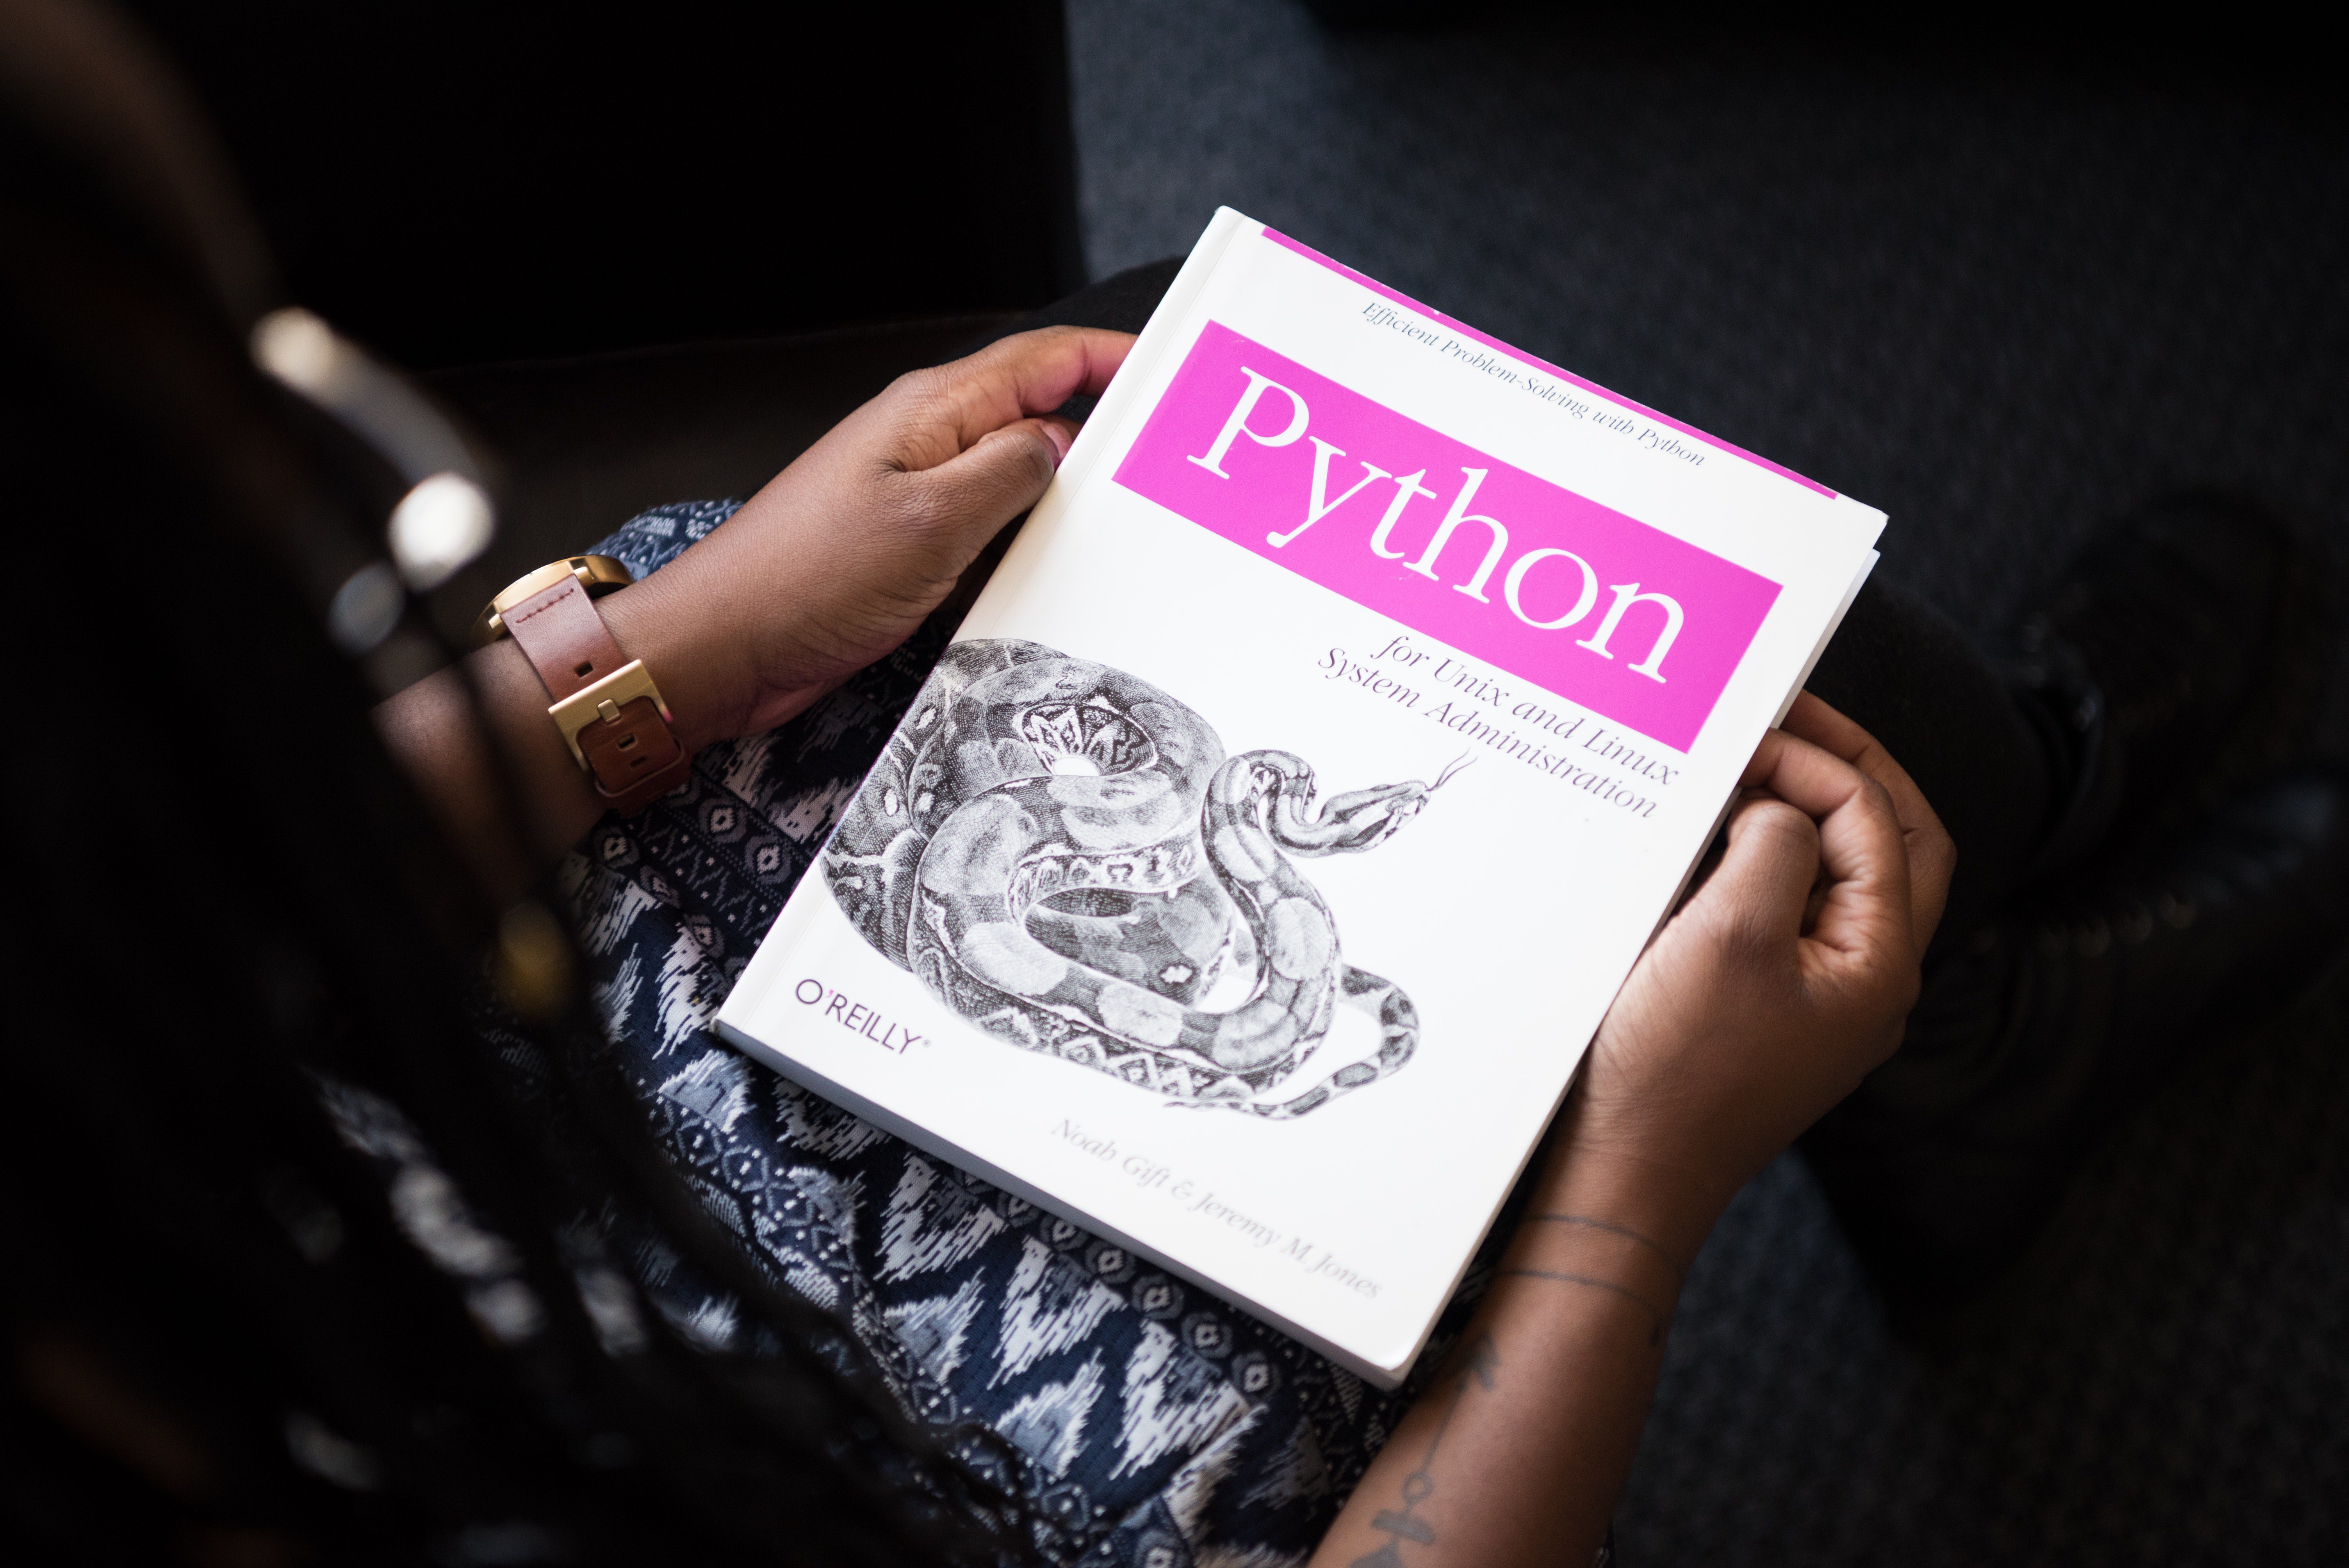 Getting Started With Python for Data Science